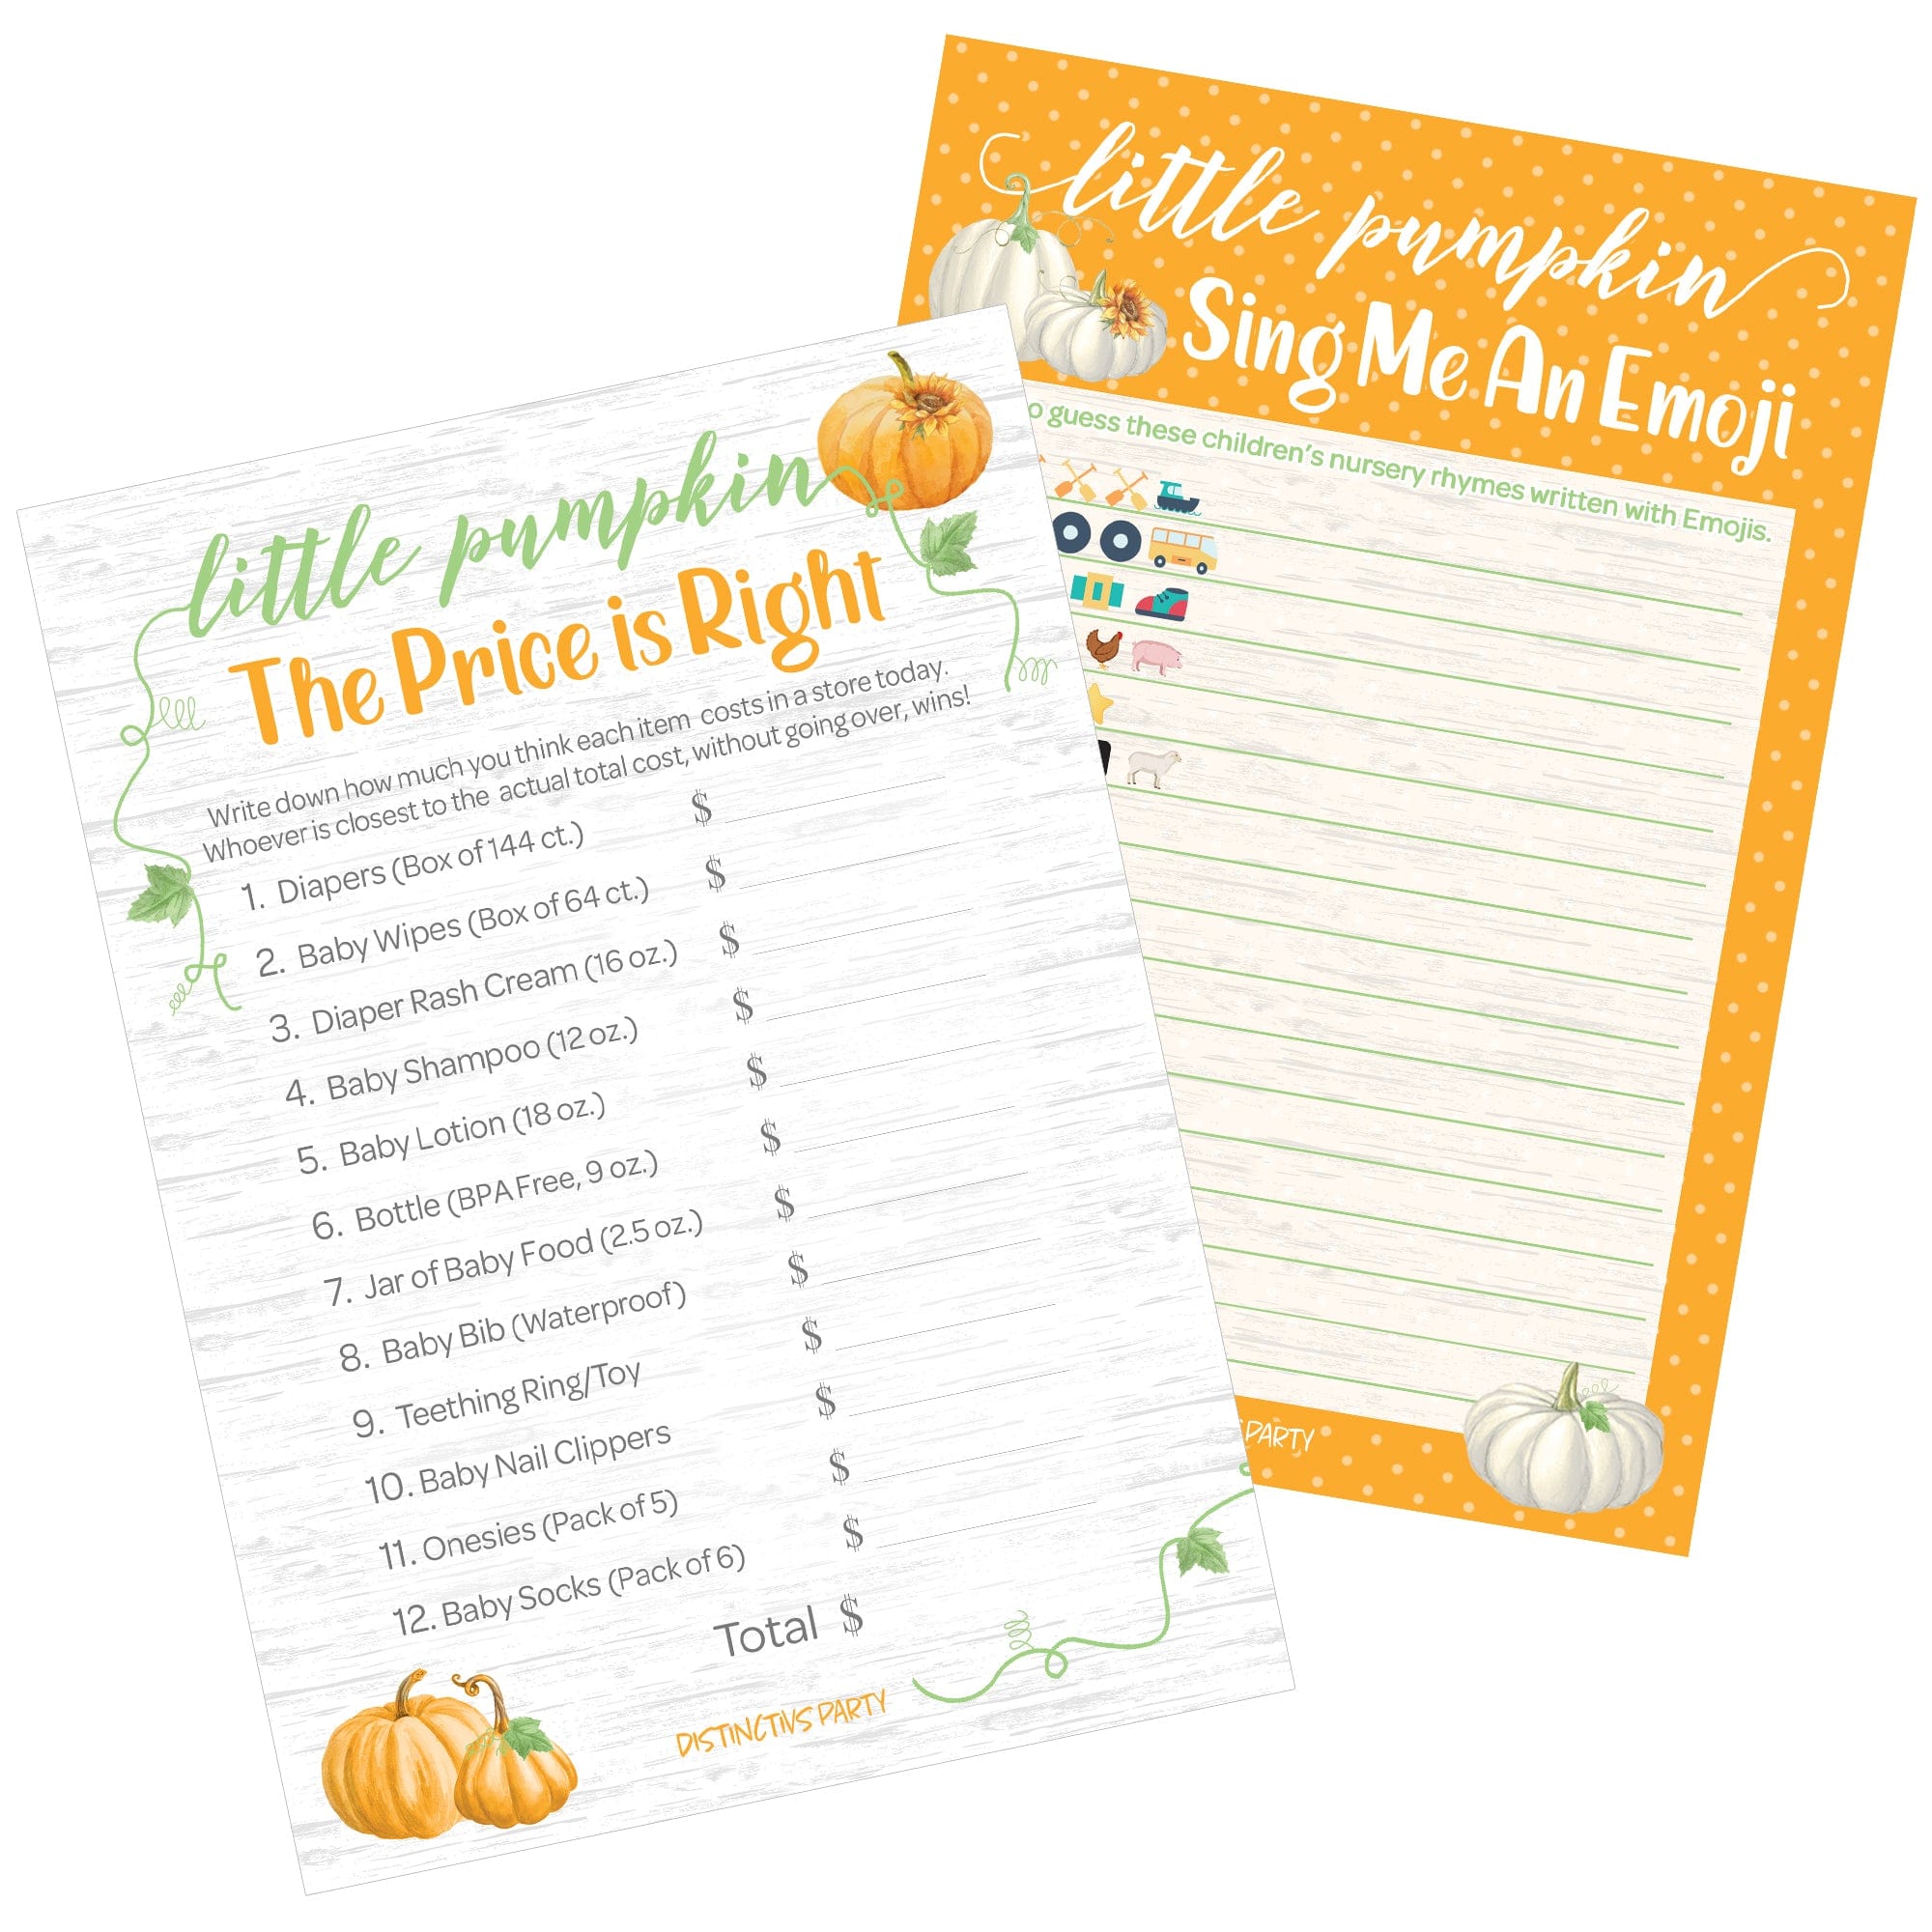 Classic Orange Little Pumpkin Baby Shower 2 Game Bundle - Price is Right and Emoji Party Activity - 20 Dual Sided Cards